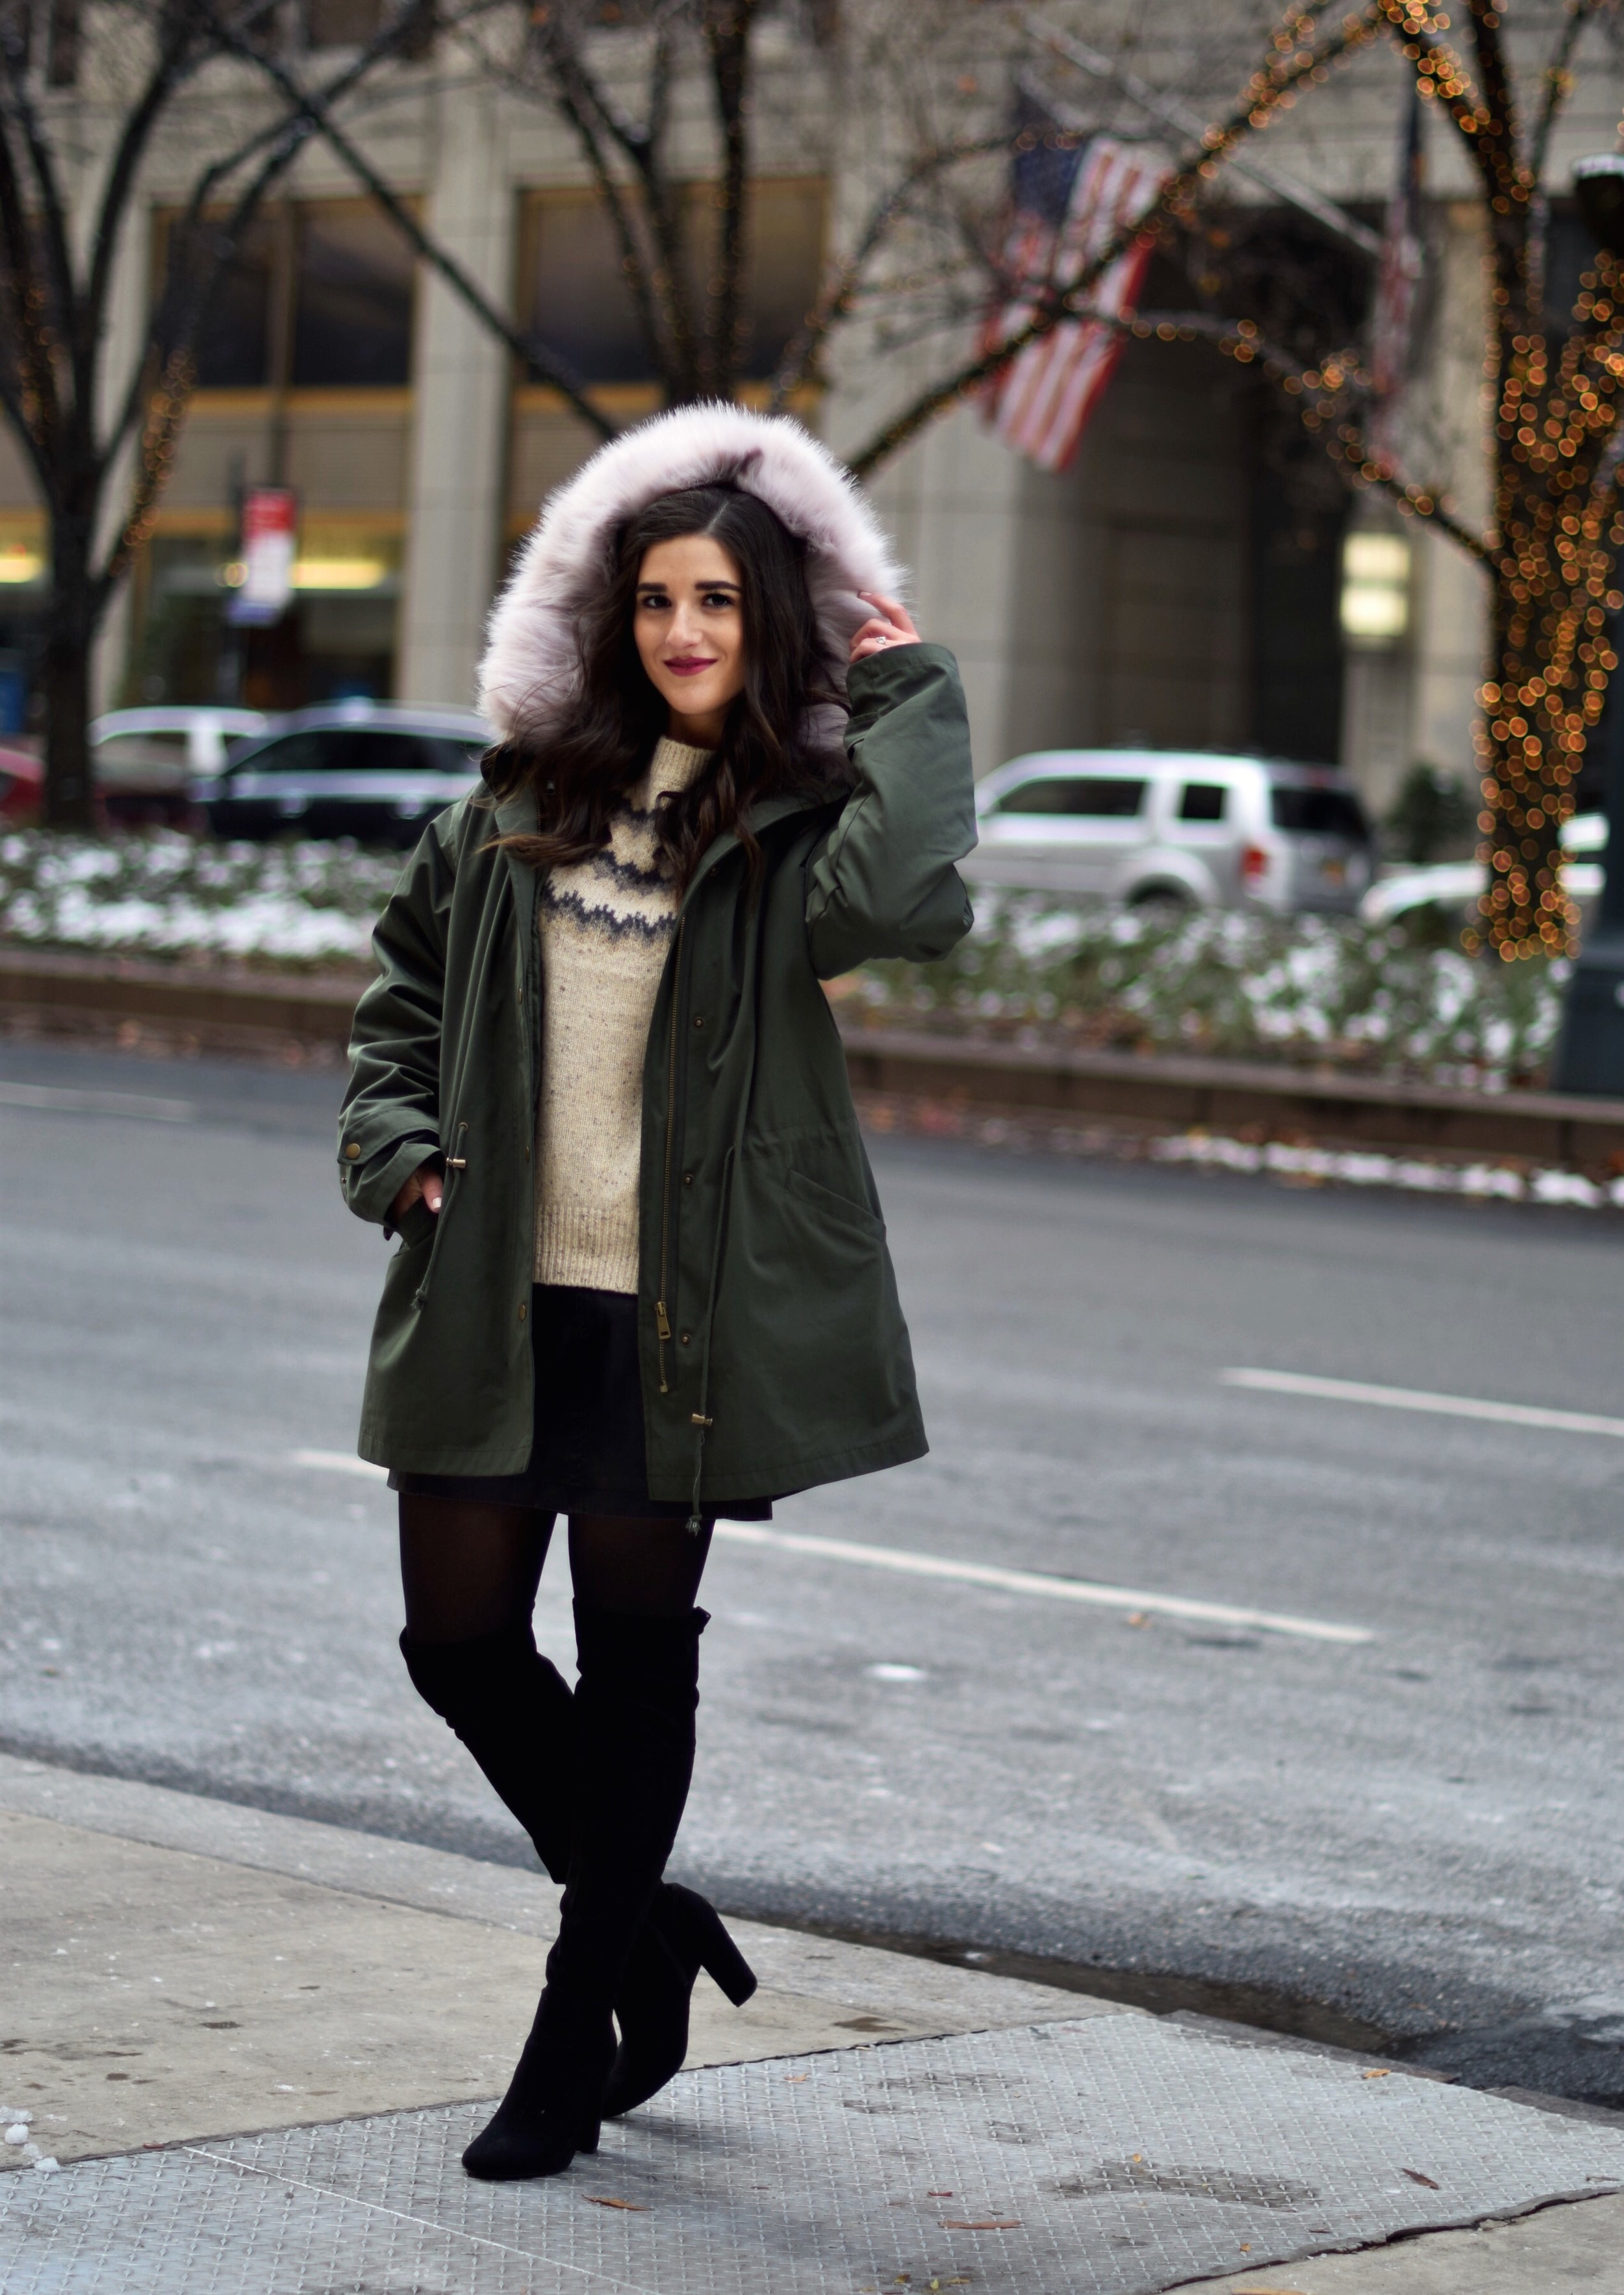 The Perfect Parka 10 Coats To Gift This Season Esther Santer Fashion Blog NYC Street Style Blogger Outfit OOTD Trendy Urban Outfitters Jacket Coat Girl Women Fur Hood Winter Black OTK Boots Cashmere Sweater Shoes Cold Weather Shopping Holiday Presents.jpg